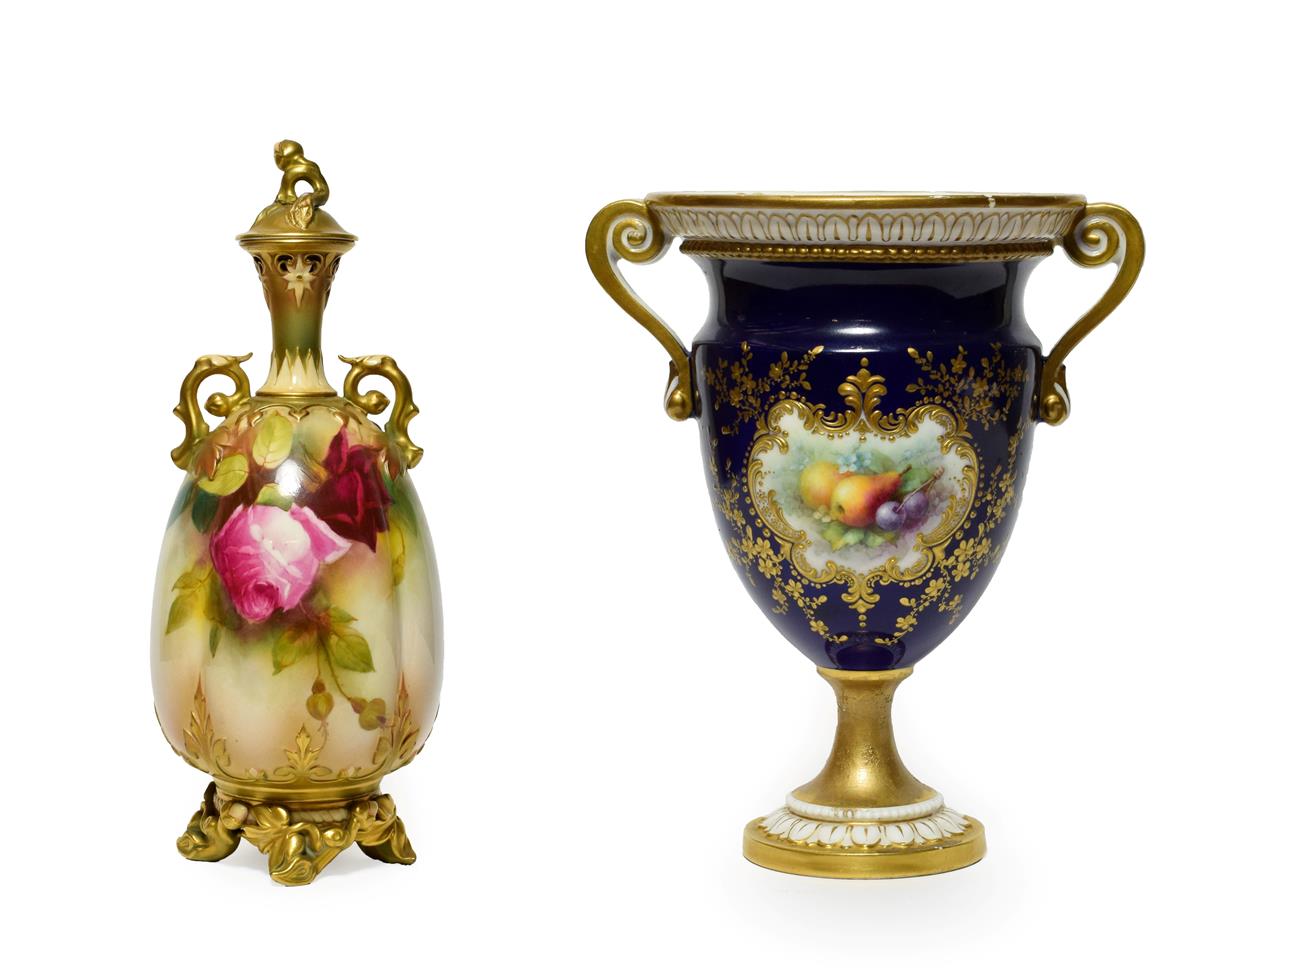 Lot 25 - A Royal Worcester Porcelain Vase and Cover, circa 1905, of fluted baluster form with scroll handles